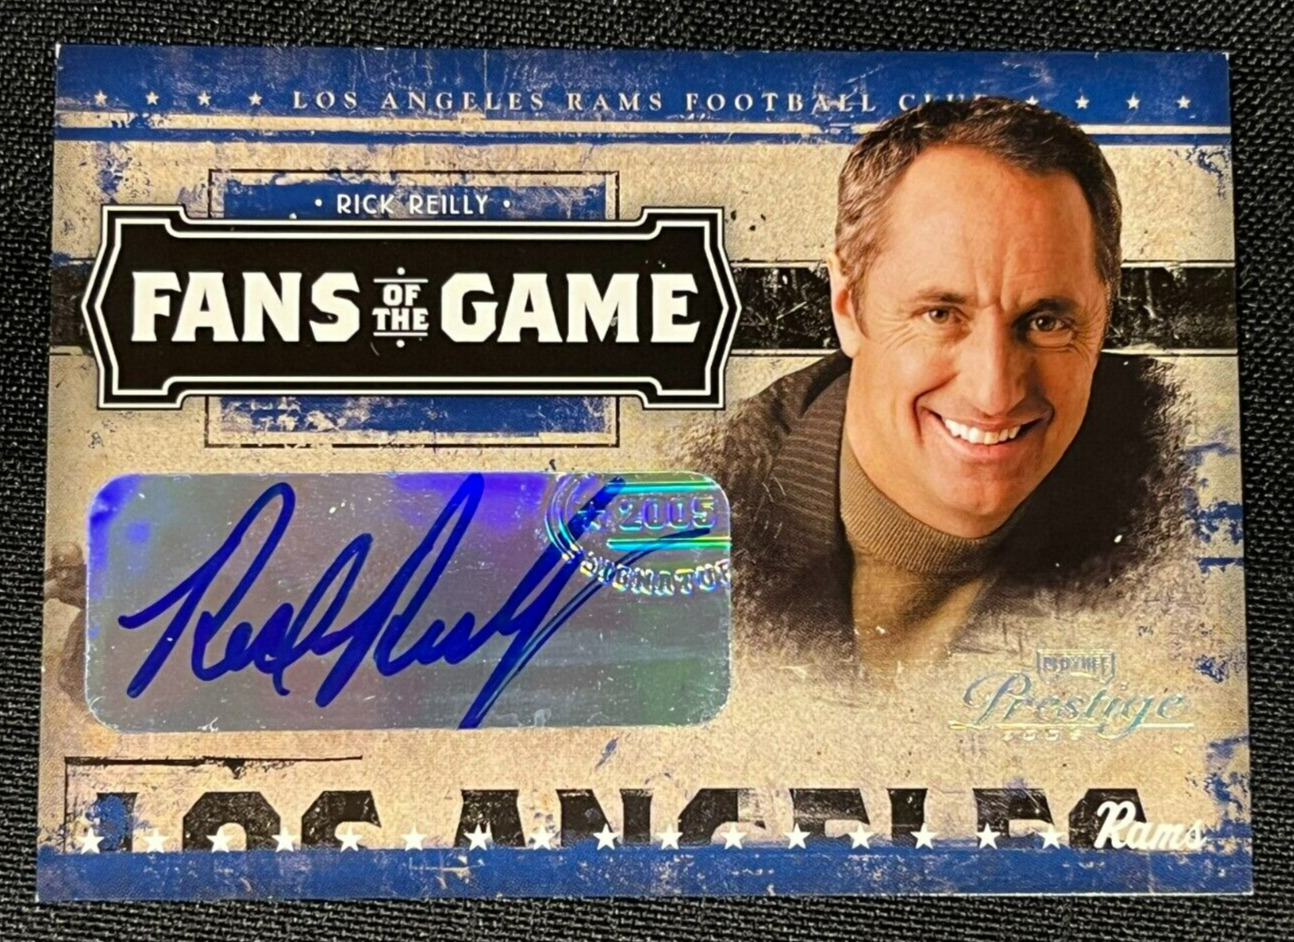 2005 Playoff Prestige Fans of the Game Rick Reilly FG-1 autographed card AA